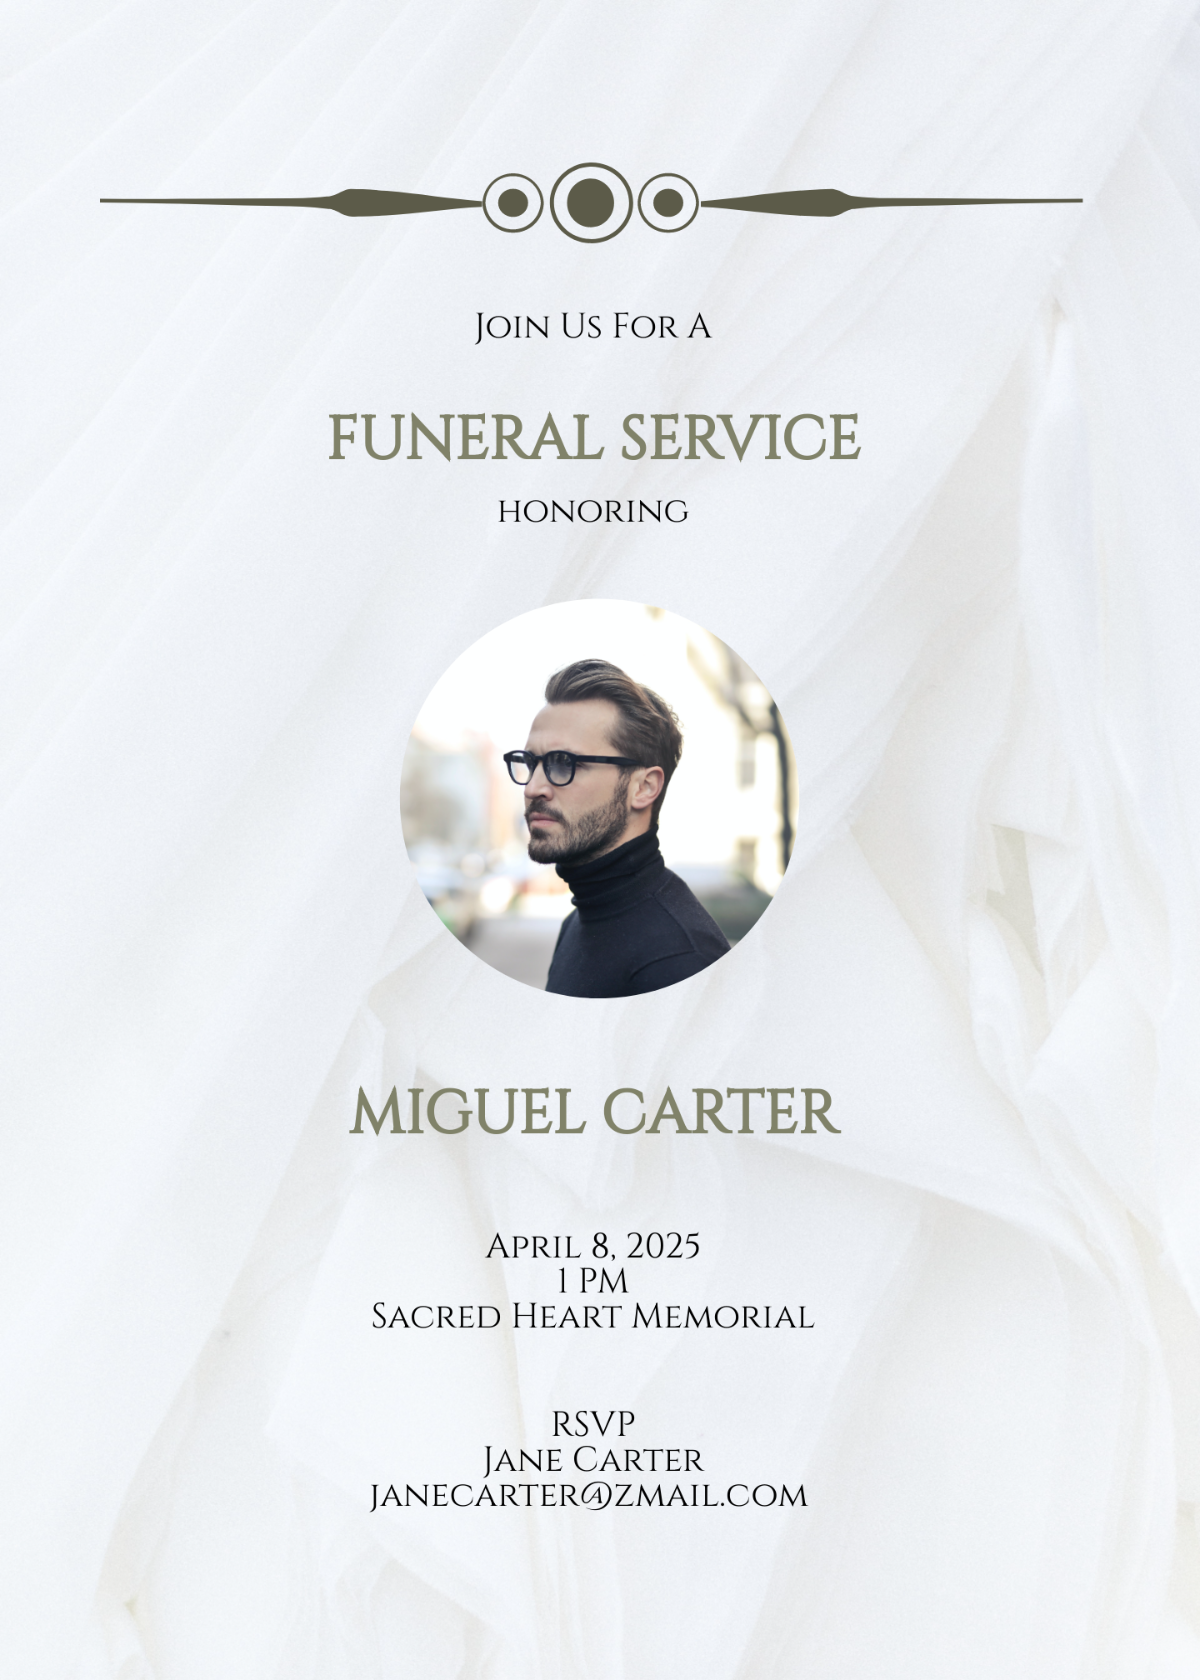 Email Funeral Invitation Template